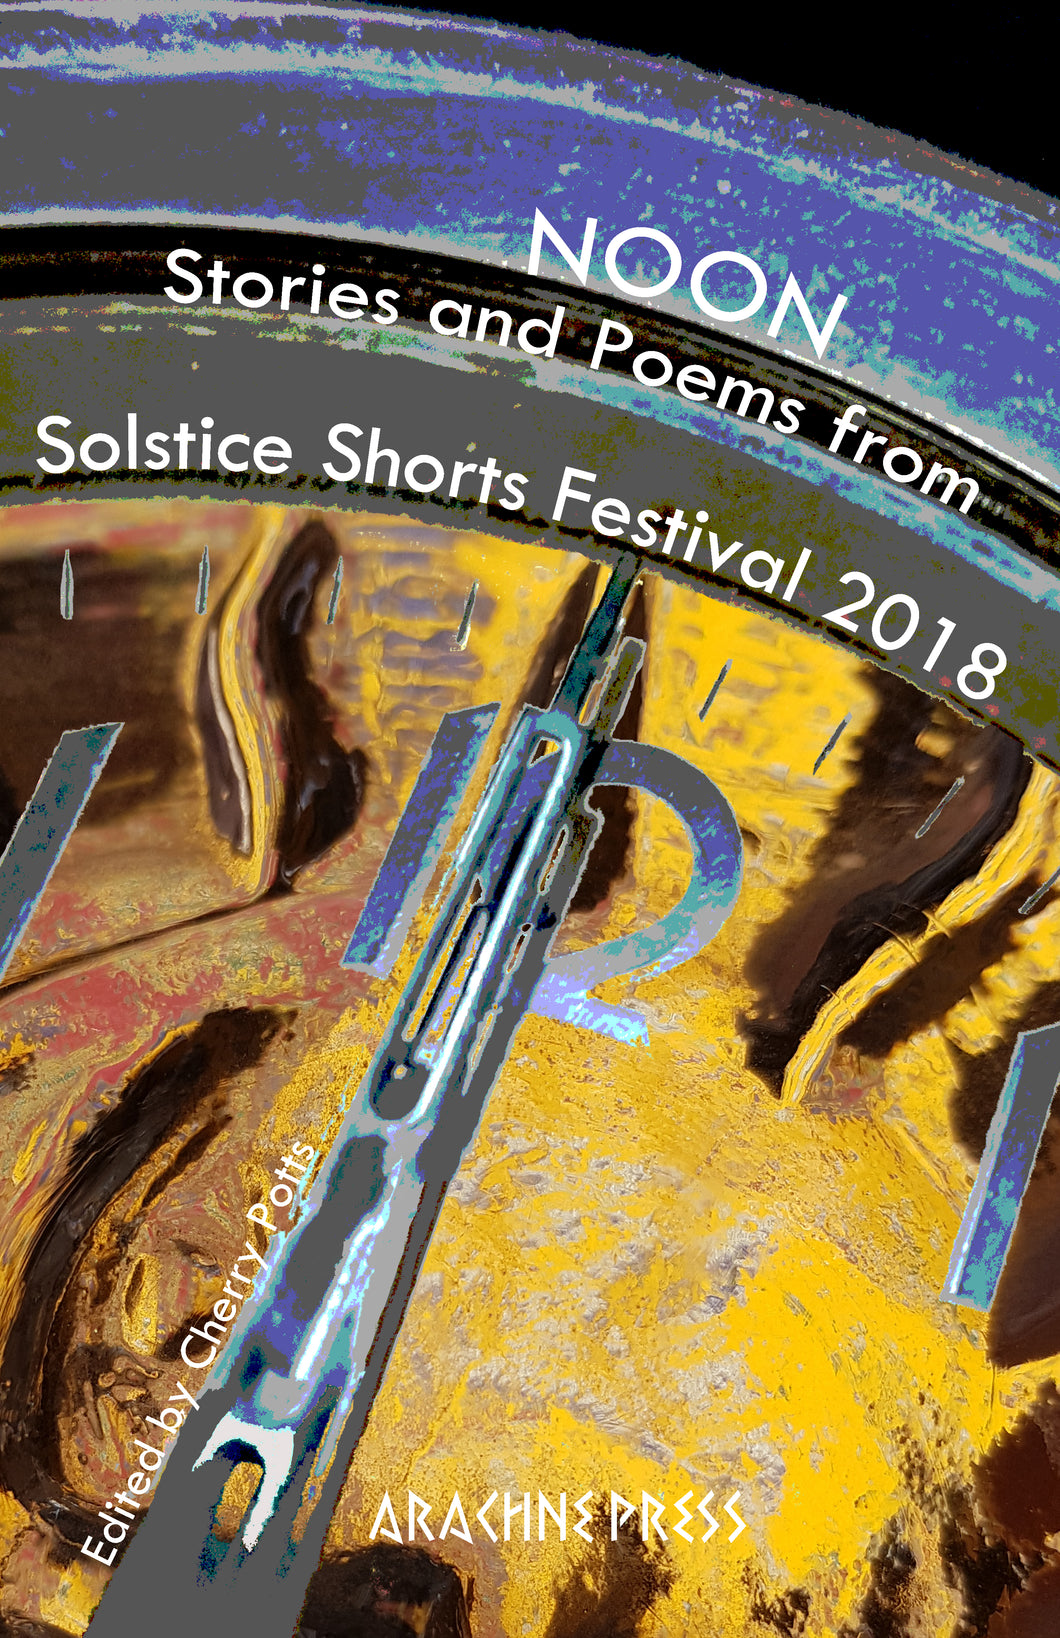 Noon: Stories and poems from Solstice Shorts Festival 2018